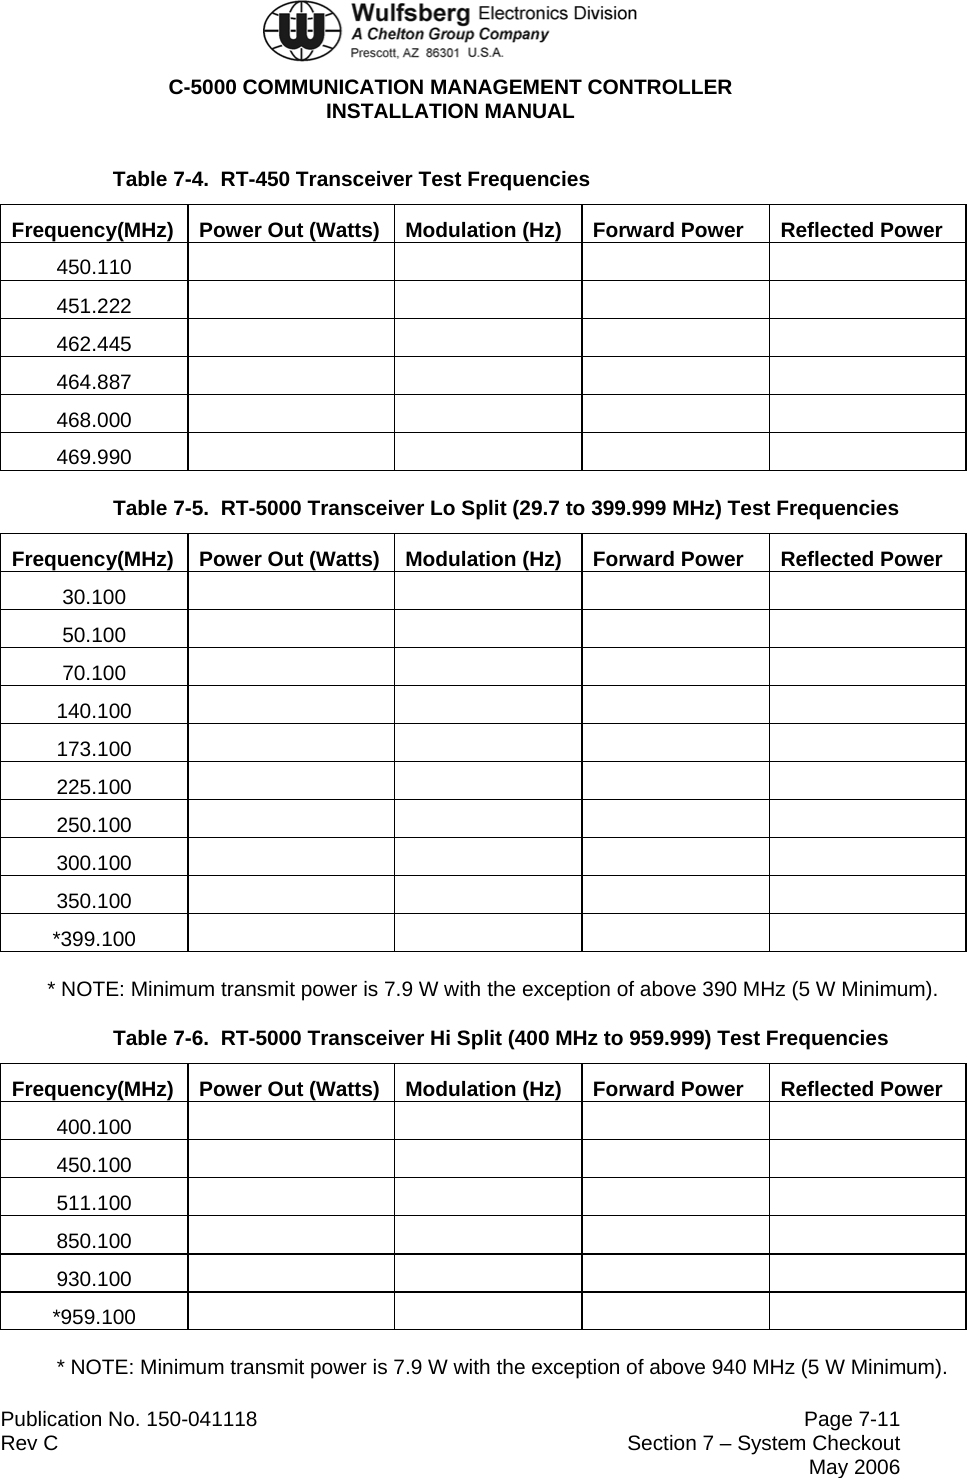  C-5000 COMMUNICATION MANAGEMENT CONTROLLER INSTALLATION MANUAL  Publication No. 150-041118  Page 7-11 Table 7-4.  RT-450 Transceiver Test Frequencies Frequency(MHz)  Power Out (Watts)  Modulation (Hz)  Forward Power  Reflected Power 450.110      451.222      462.445      464.887      468.000      469.990      Table 7-5.  RT-5000 Transceiver Lo Split (29.7 to 399.999 MHz) Test Frequencies Frequency(MHz)  Power Out (Watts)  Modulation (Hz)  Forward Power  Reflected Power 30.100      50.100      70.100      140.100      173.100      225.100      250.100      300.100      350.100      *399.100      * NOTE: Minimum transmit power is 7.9 W with the exception of above 390 MHz (5 W Minimum). Table 7-6.  RT-5000 Transceiver Hi Split (400 MHz to 959.999) Test Frequencies Frequency(MHz)  Power Out (Watts)  Modulation (Hz)  Forward Power  Reflected Power 400.100      450.100      511.100      850.100      930.100      *959.100      * NOTE: Minimum transmit power is 7.9 W with the exception of above 940 MHz (5 W Minimum). Rev C  Section 7 – System Checkout  May 2006  